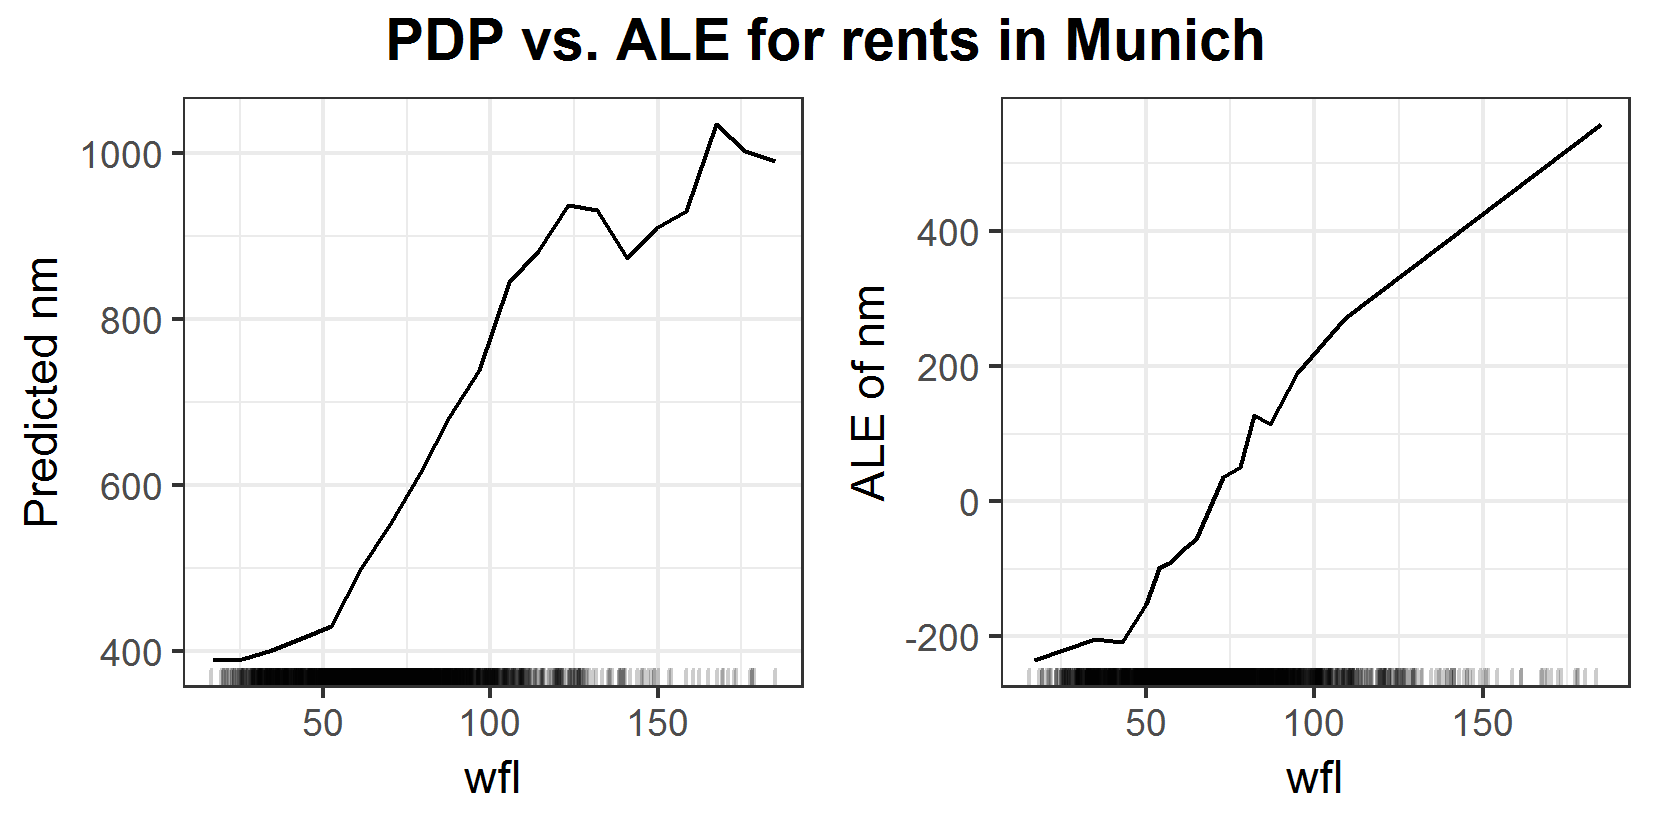 PDP and ALE plots for the influence of space on rents in Munich.